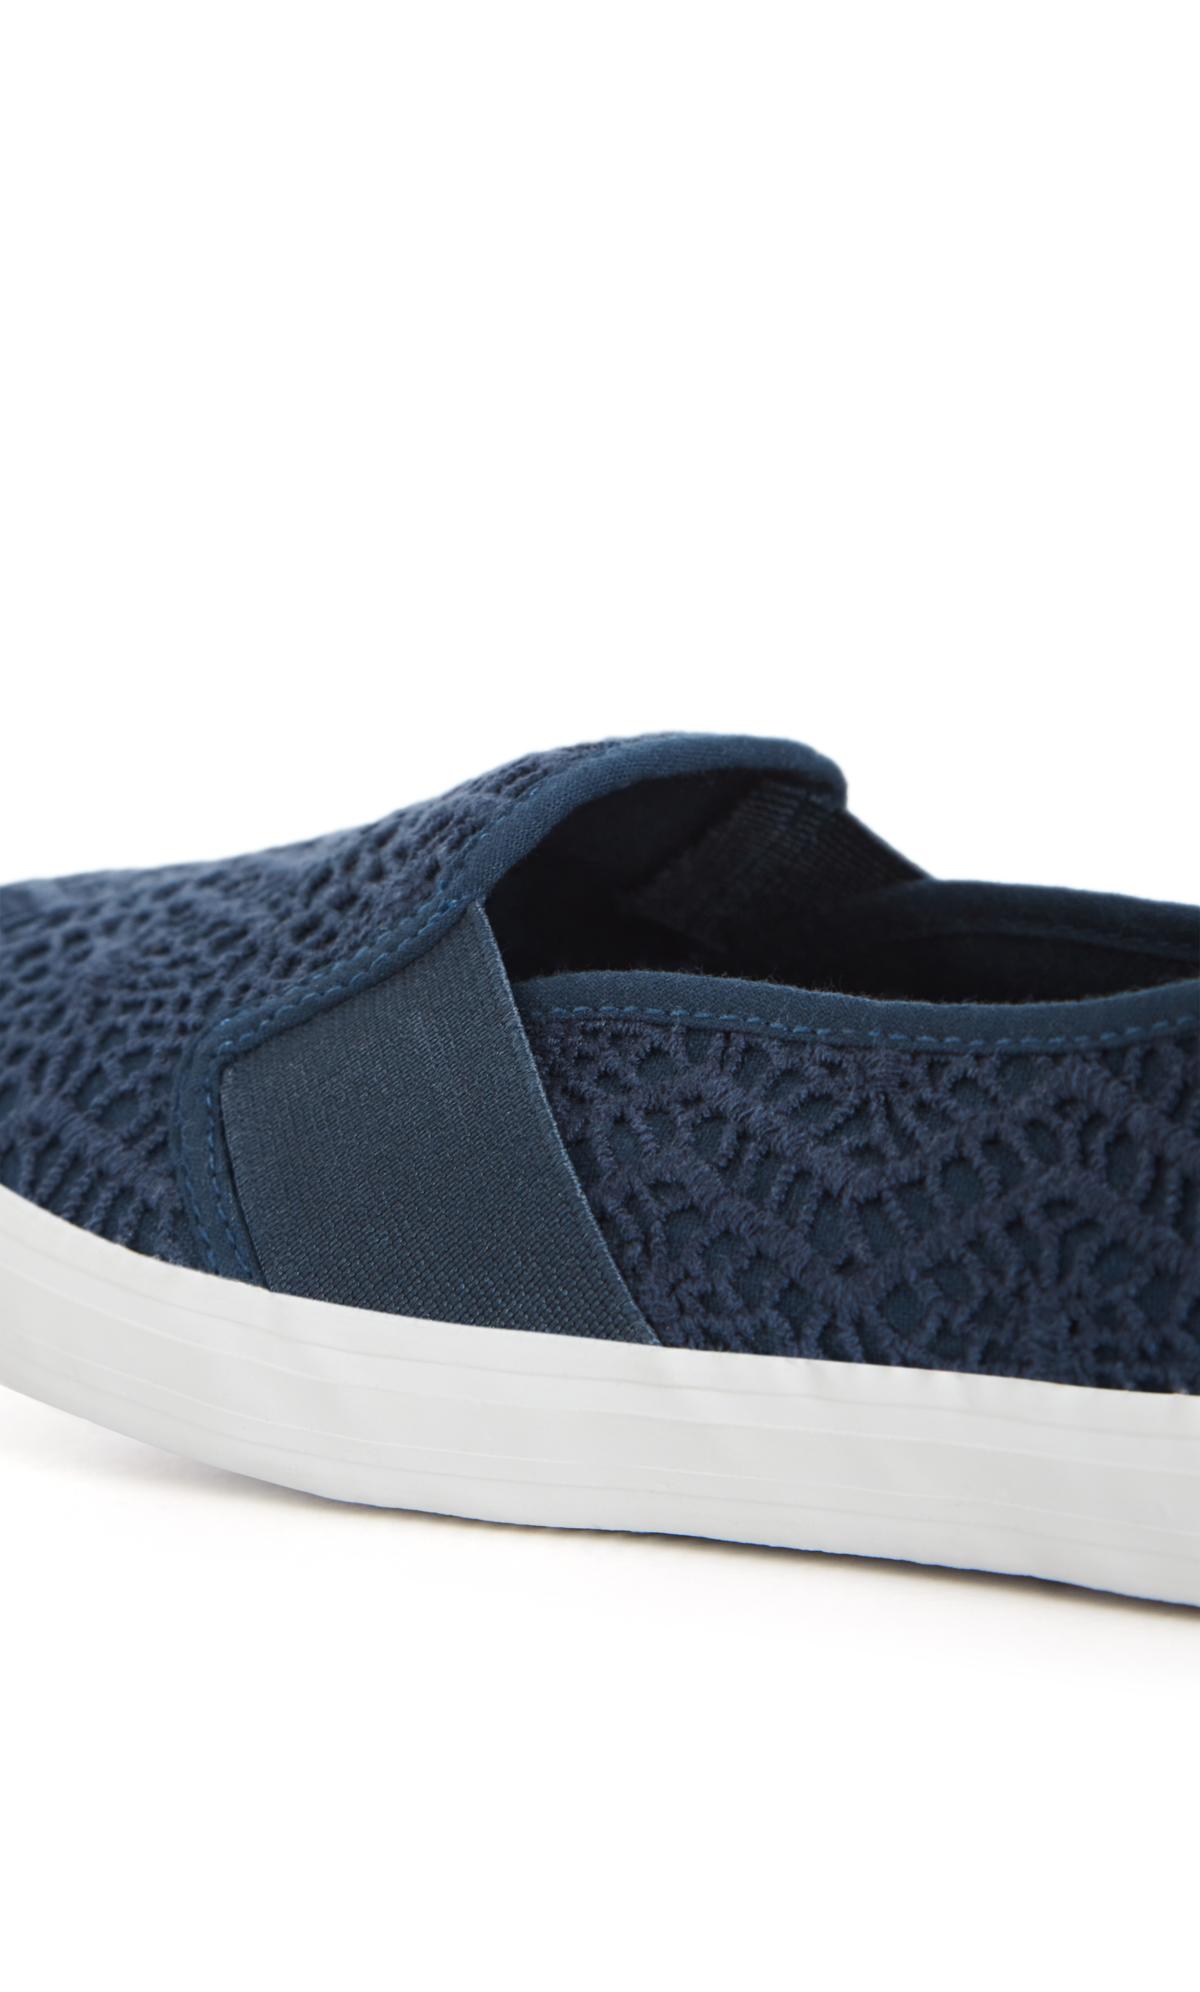 Avenue WIDE FIT Navy Blue Broderie Anglaise Slip On Trainers | Evans